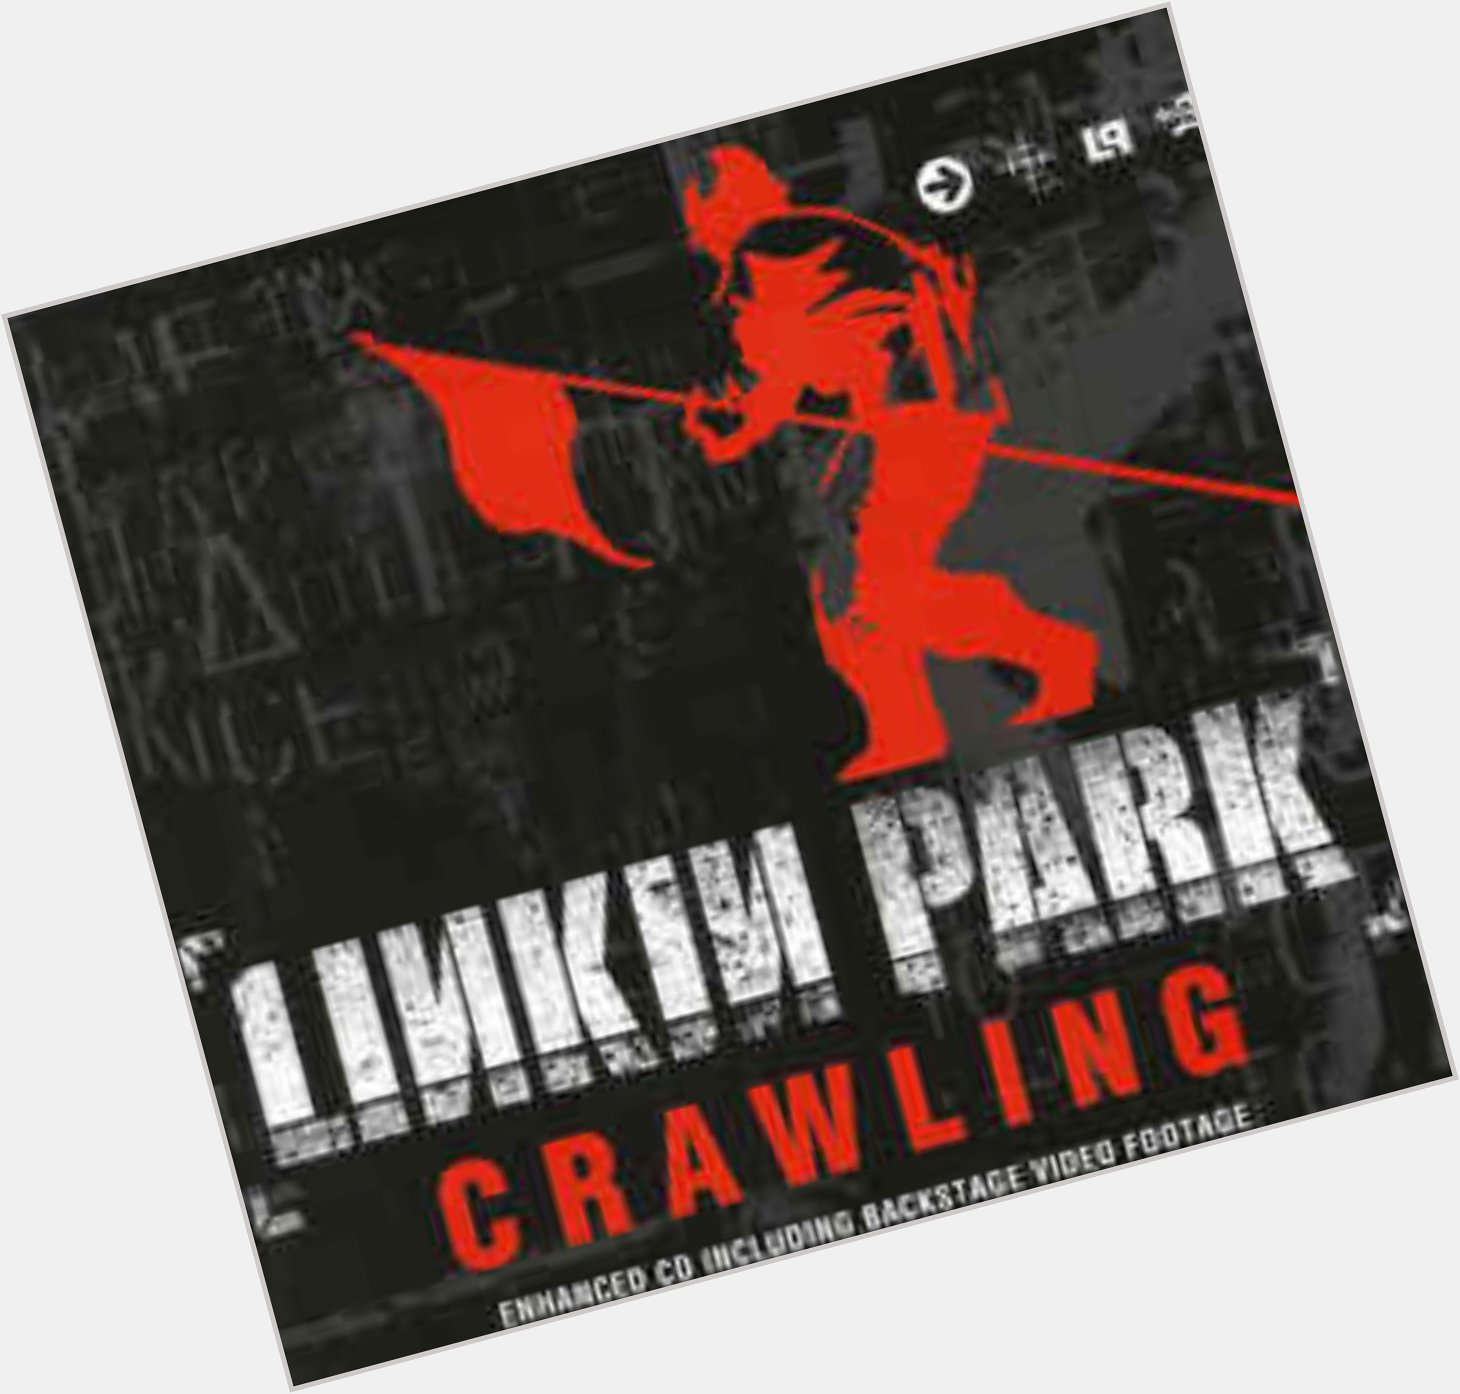 Linkin Park Crawling Happy Birthday to a friend I loved and miss...Chester Bennington 